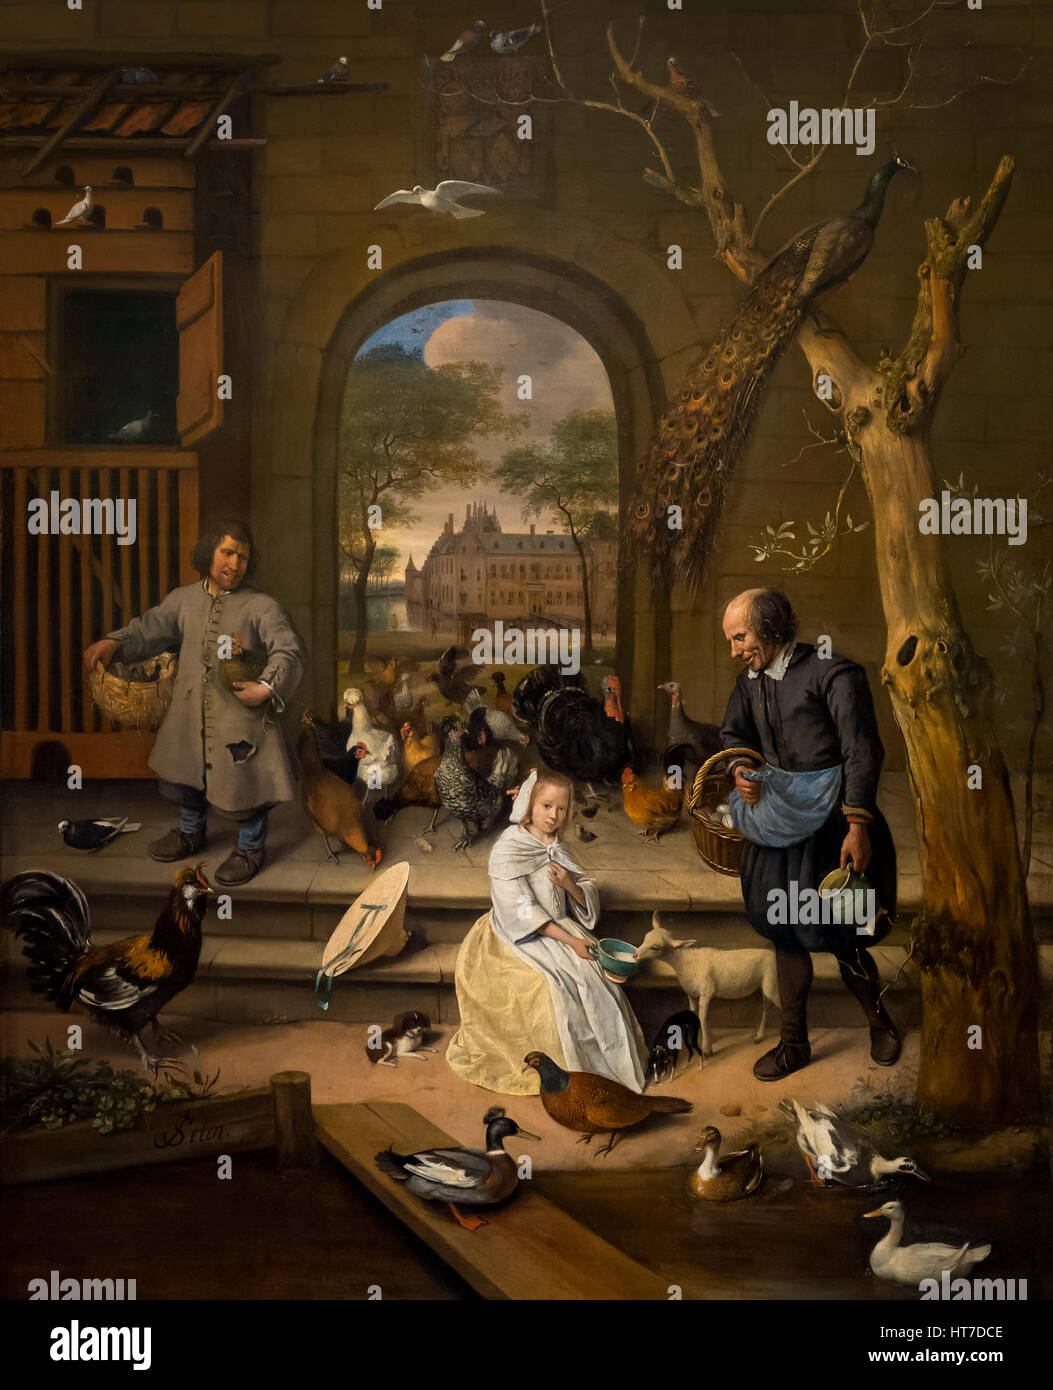 Portrait of Jacoba Maria van Wassenaer, The Poultry Yard, by Jan Steen, 1660, Royal Art Gallery, Mauritshuis Museum, The Hague, Netherlands, Europe Stock Photo